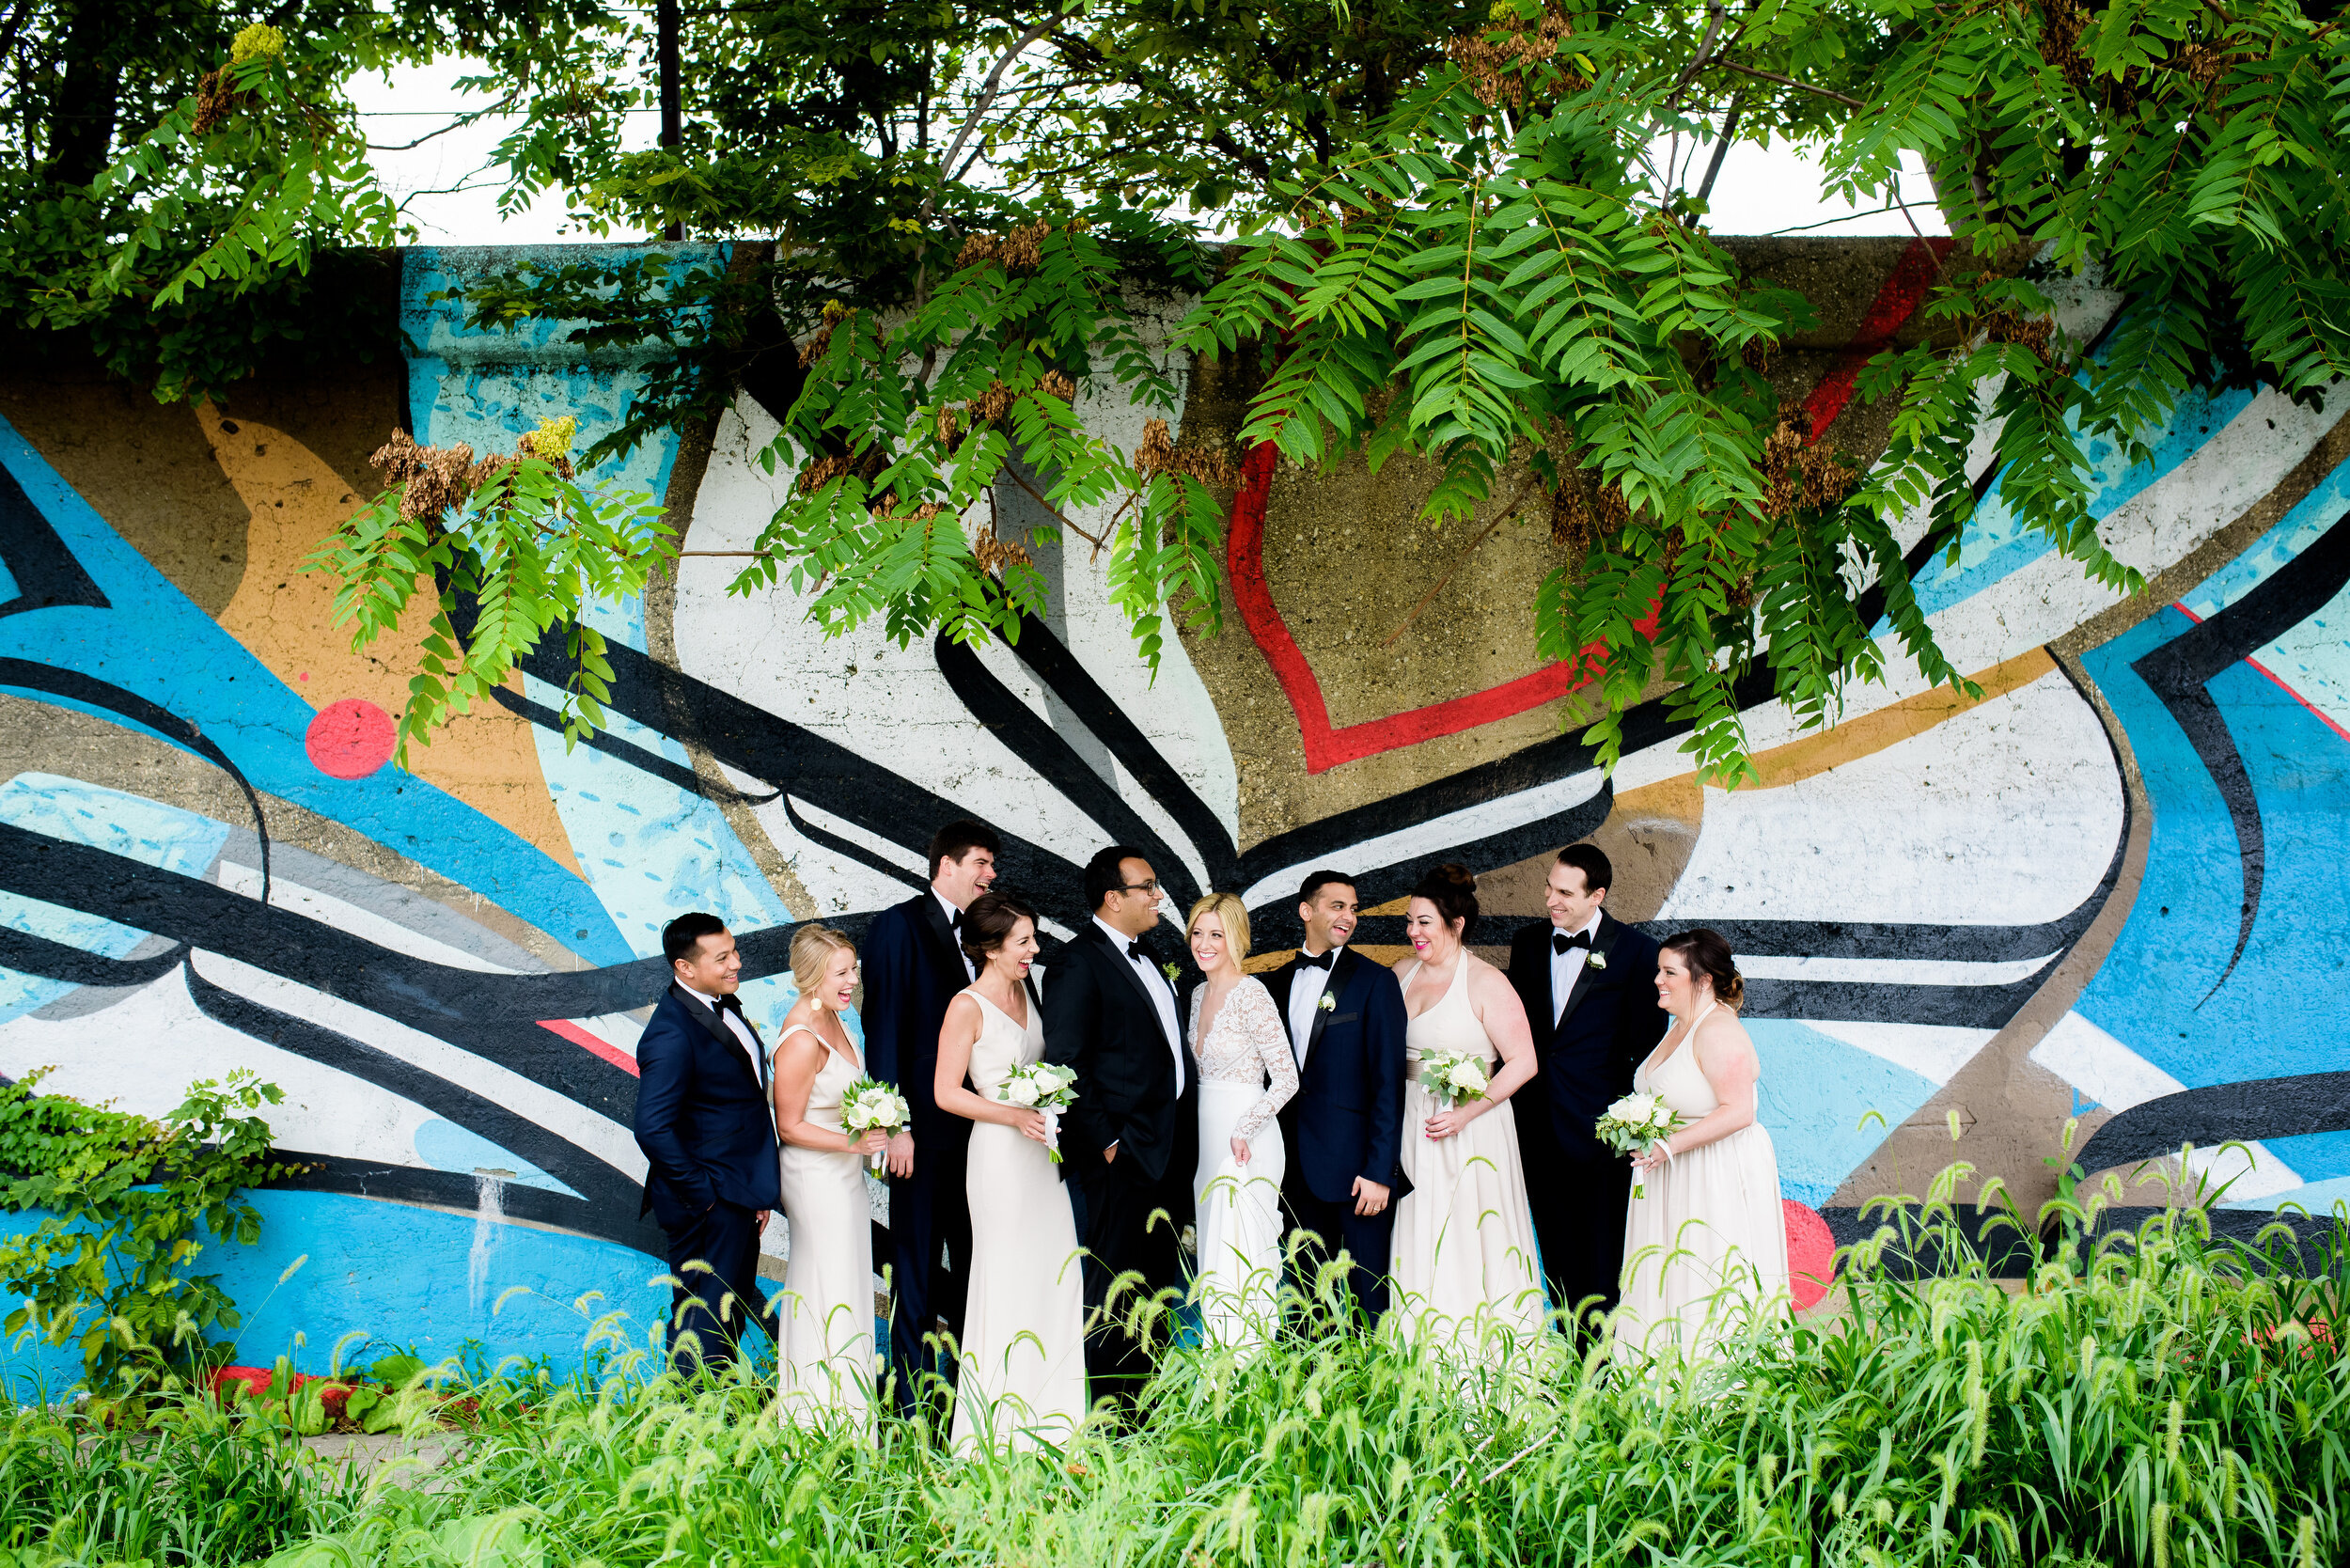 Creative wedding party photo with street art in Pilsen: Geraghty Chicago wedding photography captured by J. Brown Photography.